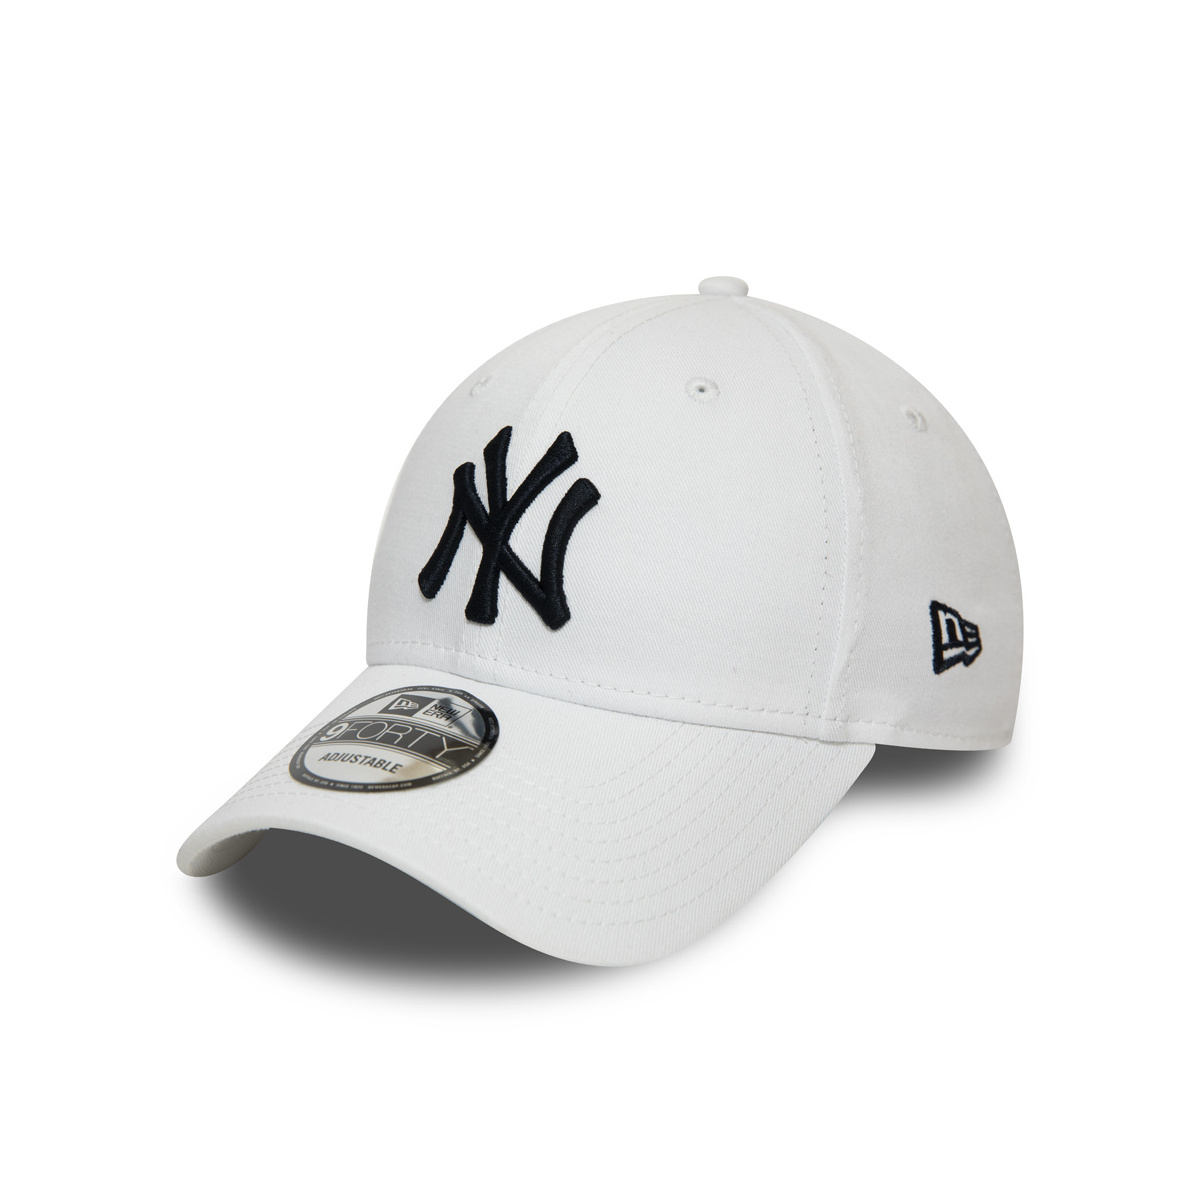 NY Yankees Essential 9Forty Cotton Cap White - New Era Reference ...